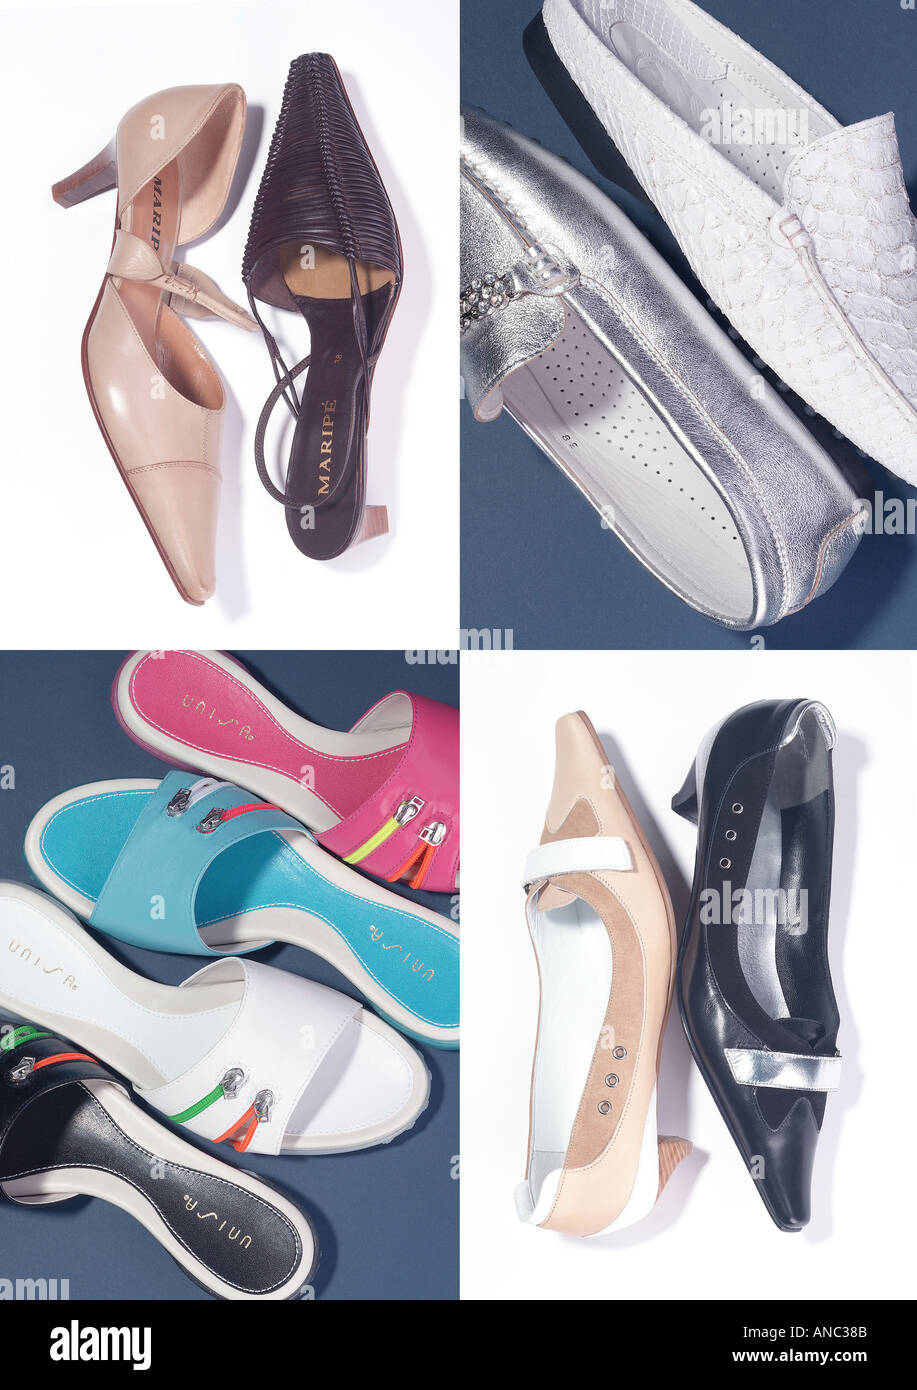 https://c8.alamy.com/comp/ANC38B/various-assorted-trendy-womens-shoes-collection-summer-ANC38B.jpg